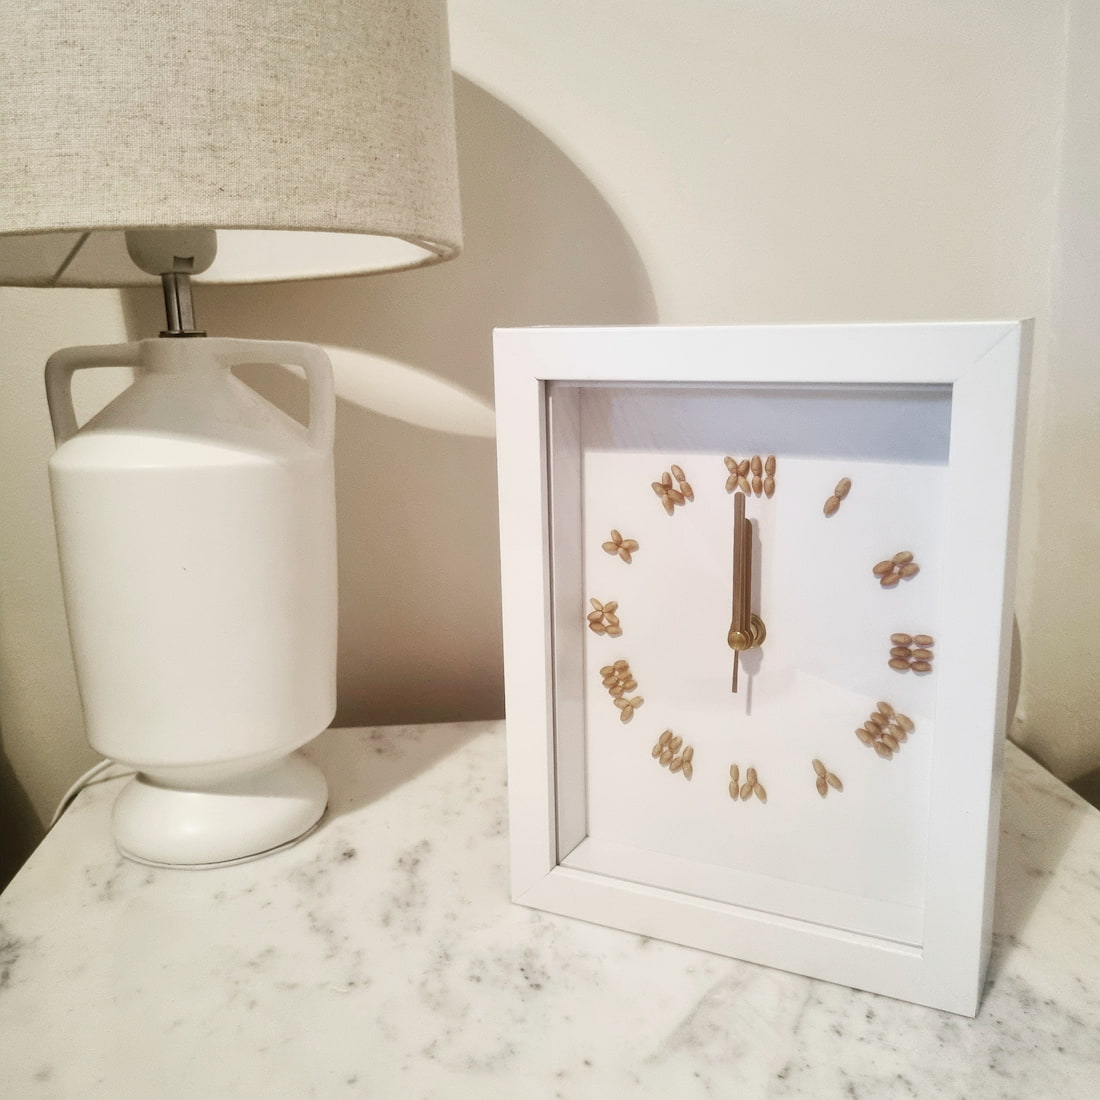 Clock with wheat grains in place of numbers sitting on table